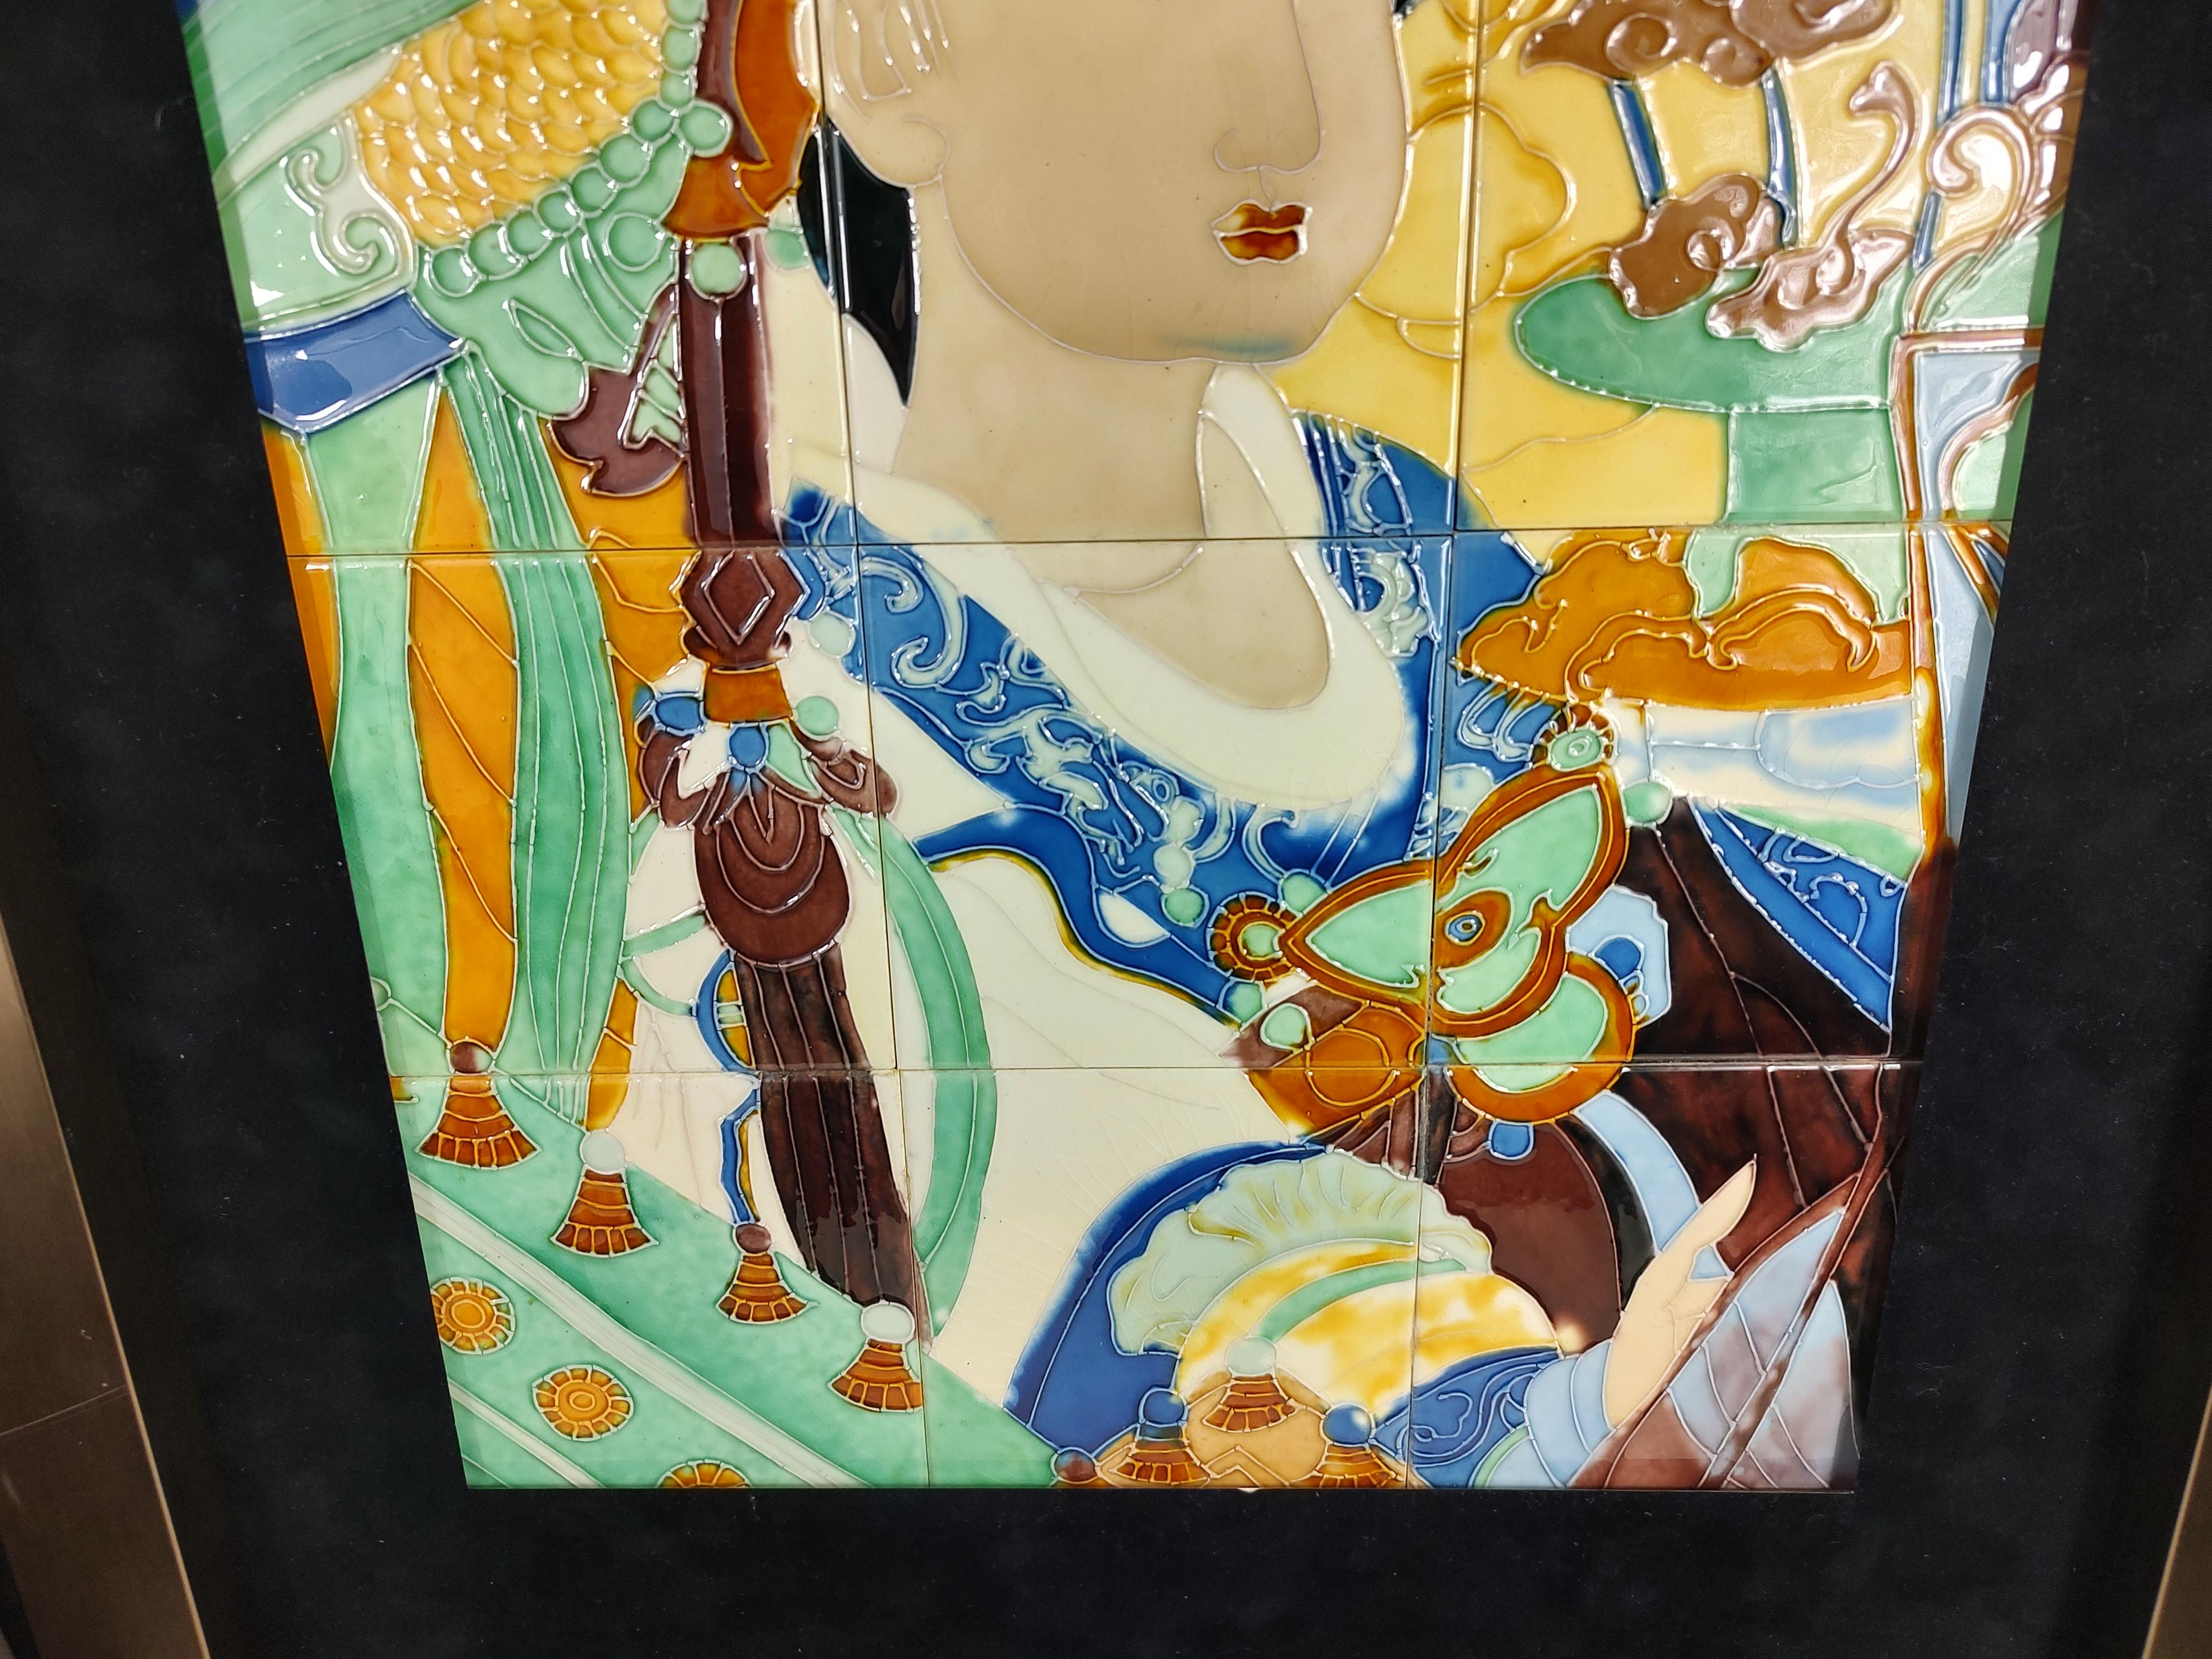 Mid-Century Modern Glazed Ceramic Tile Art of a Japanese Woman 12 Tiles In Good Condition For Sale In Port Jervis, NY